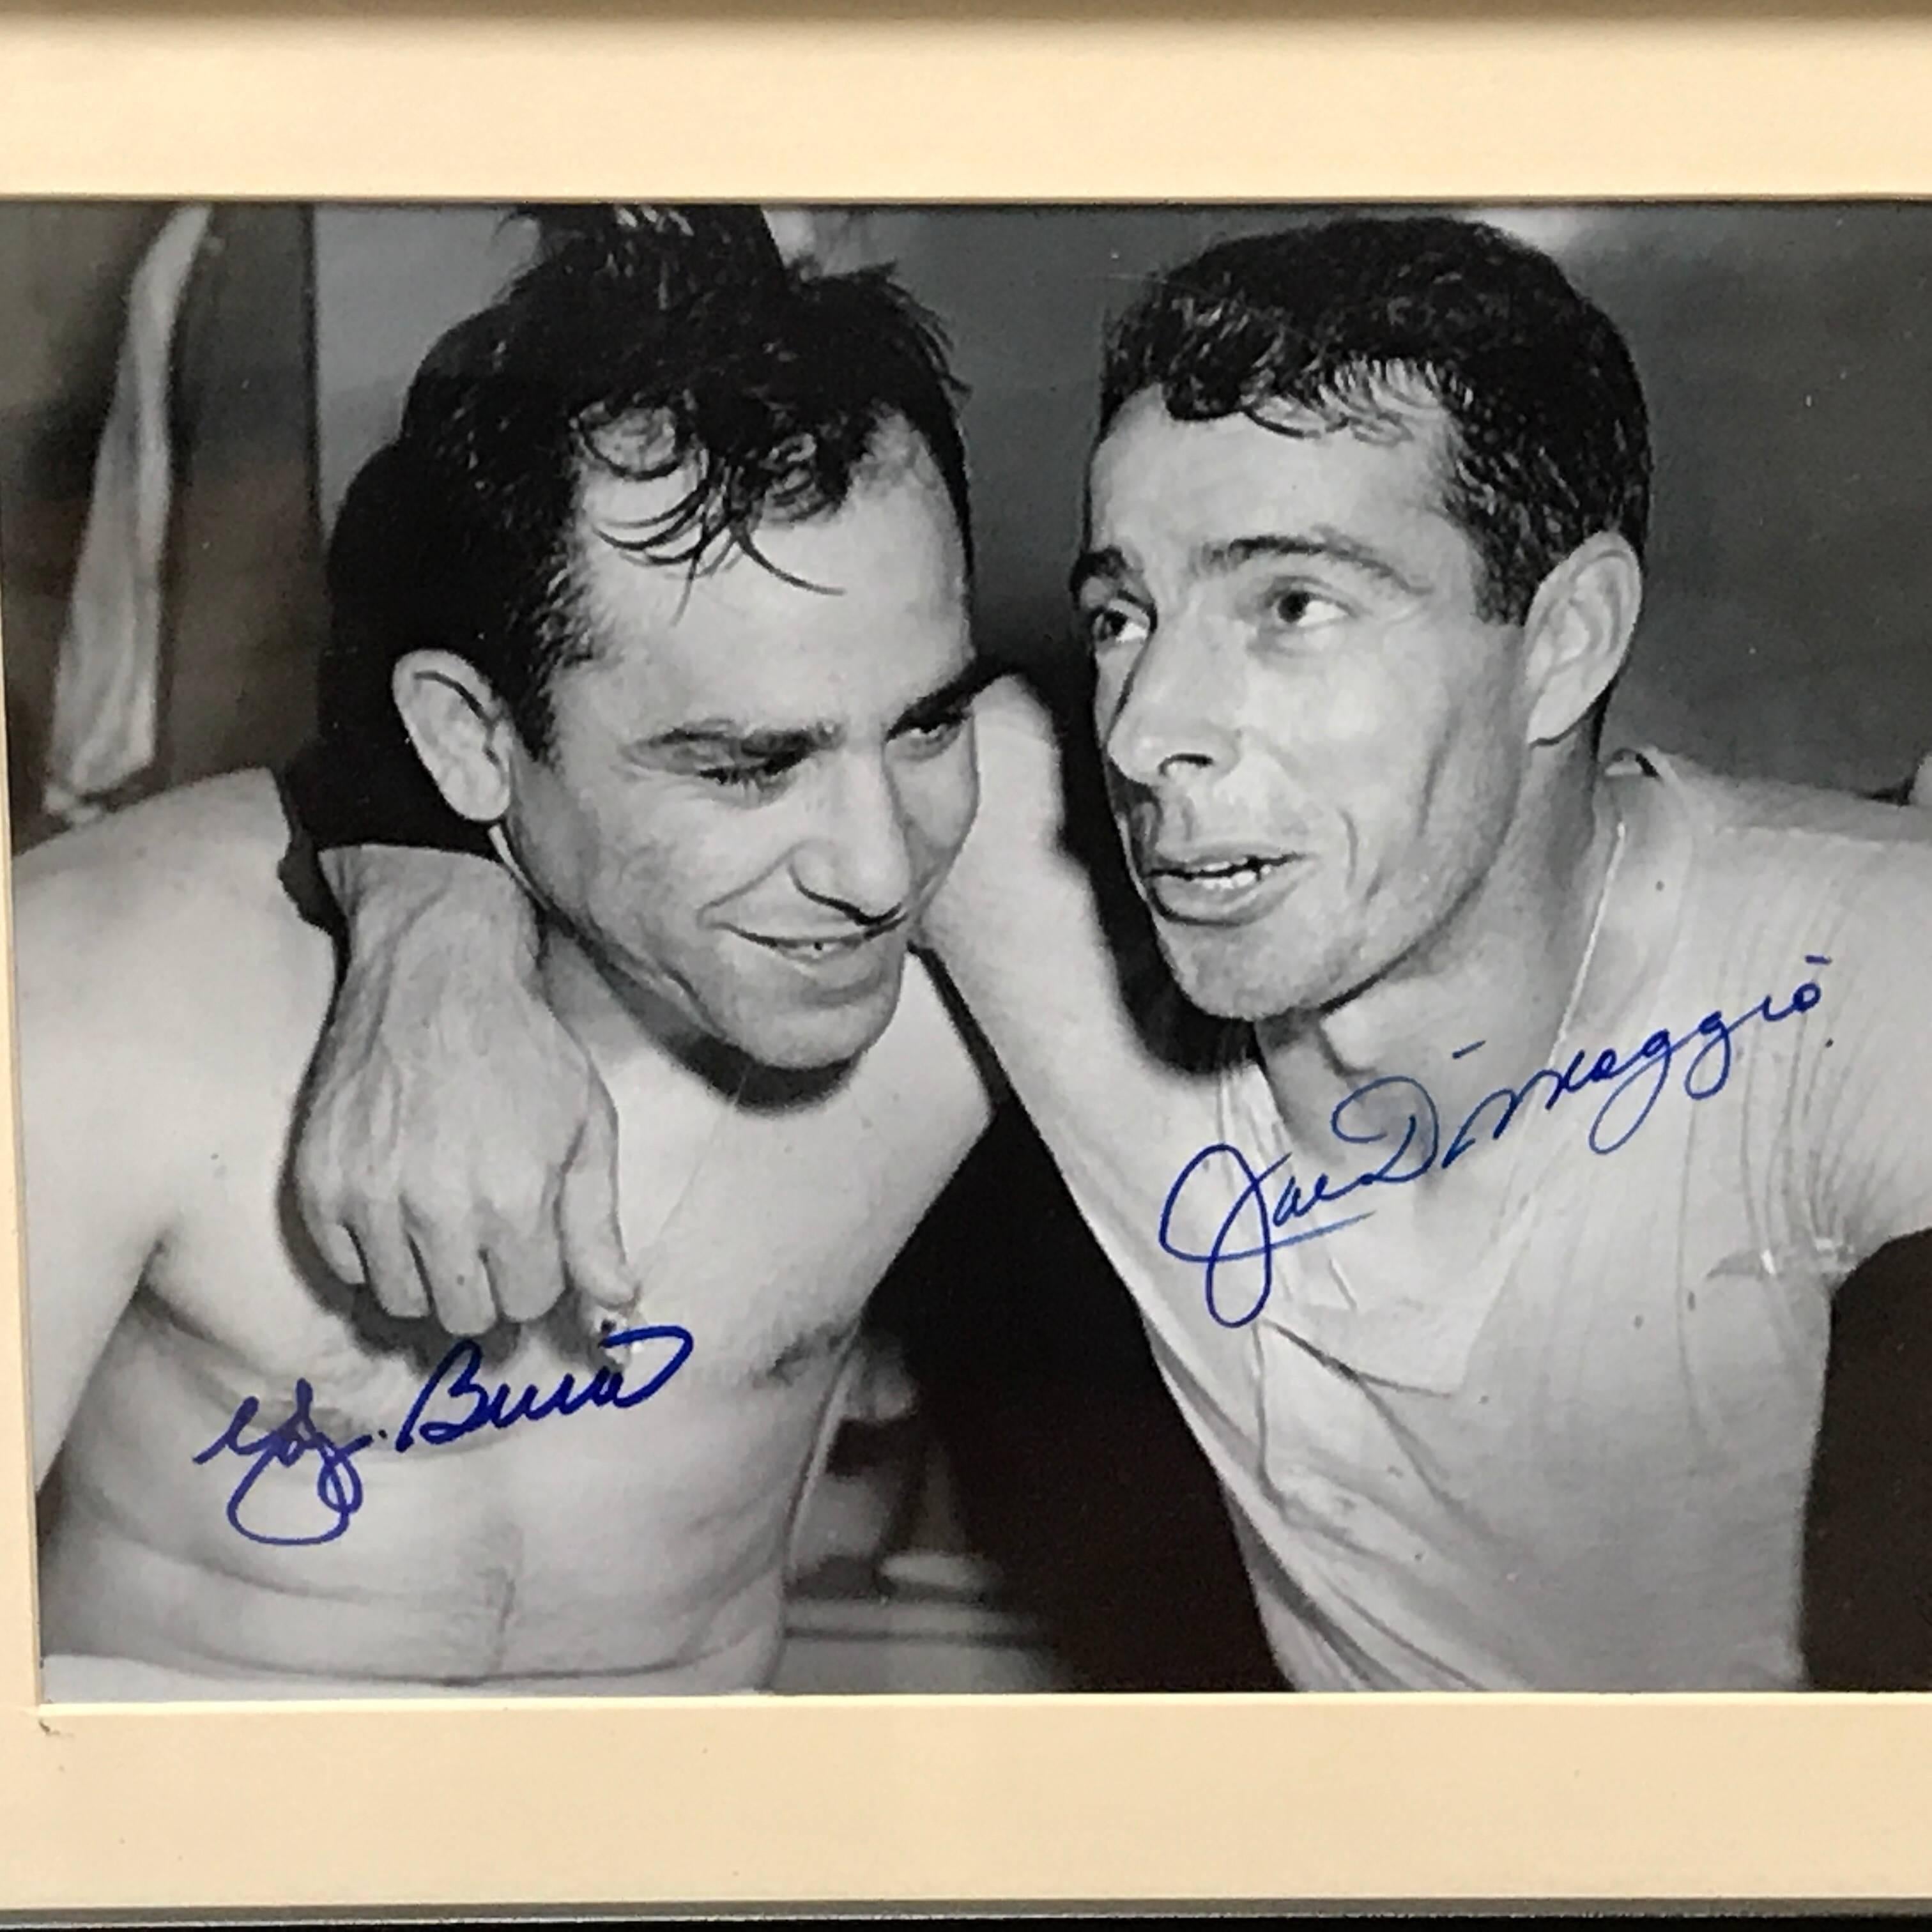 Autographed photo of Yogi Berra & Joe DiMaggio
Signed by both players
Photo measures: 10 x 8 inches
Framed and matted 12